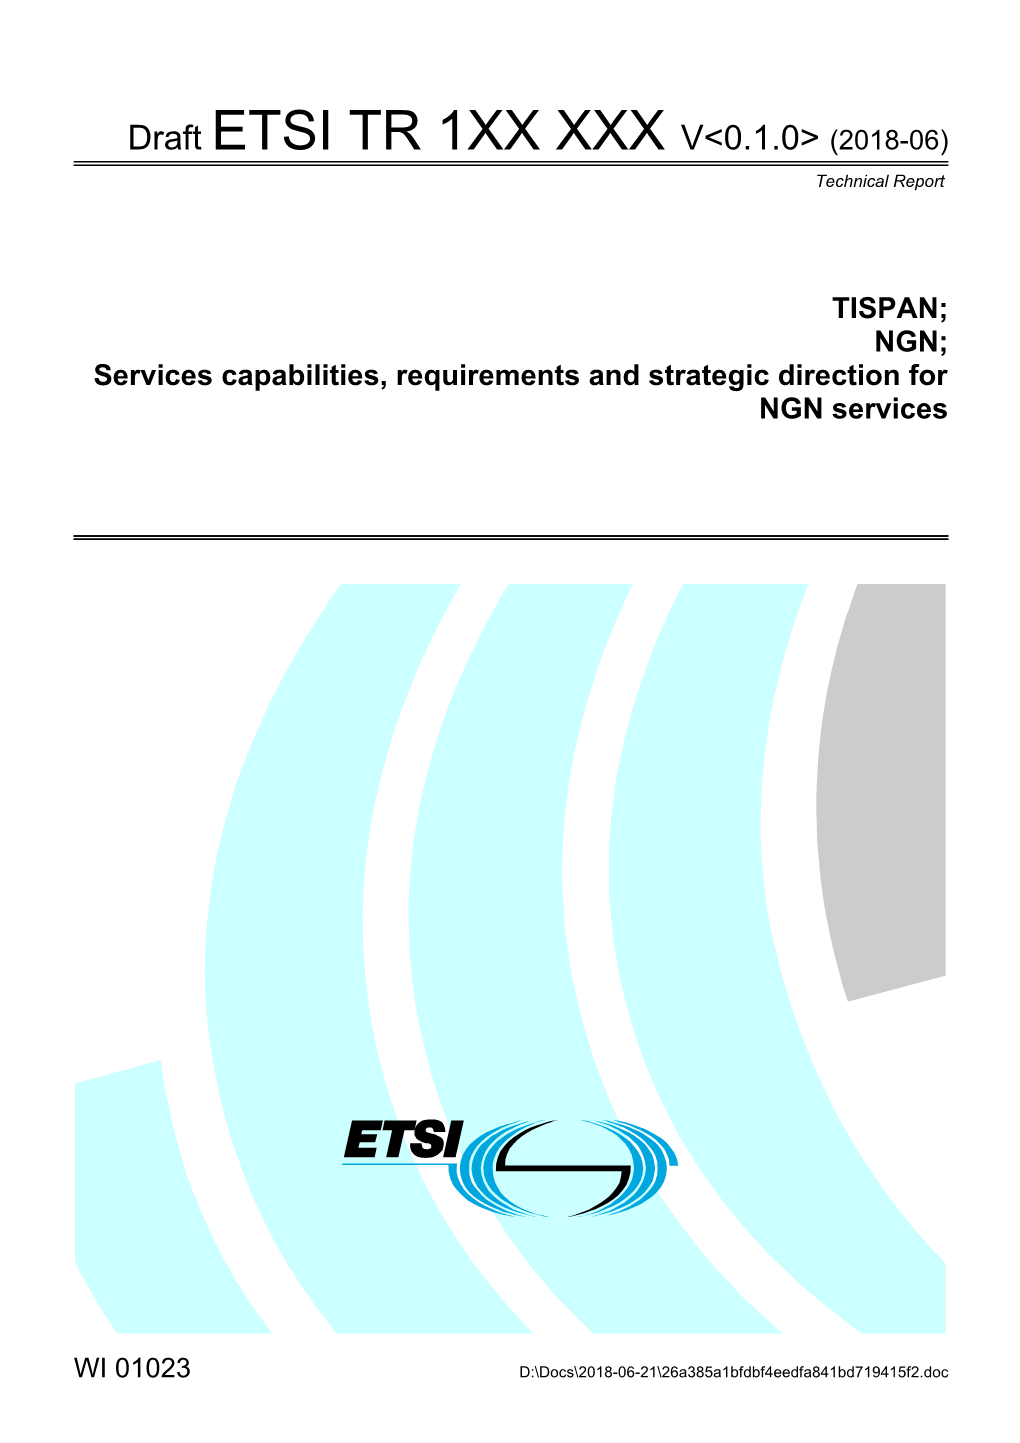 Services Capabilities, Requirements and Strategic Direction for NGN Services